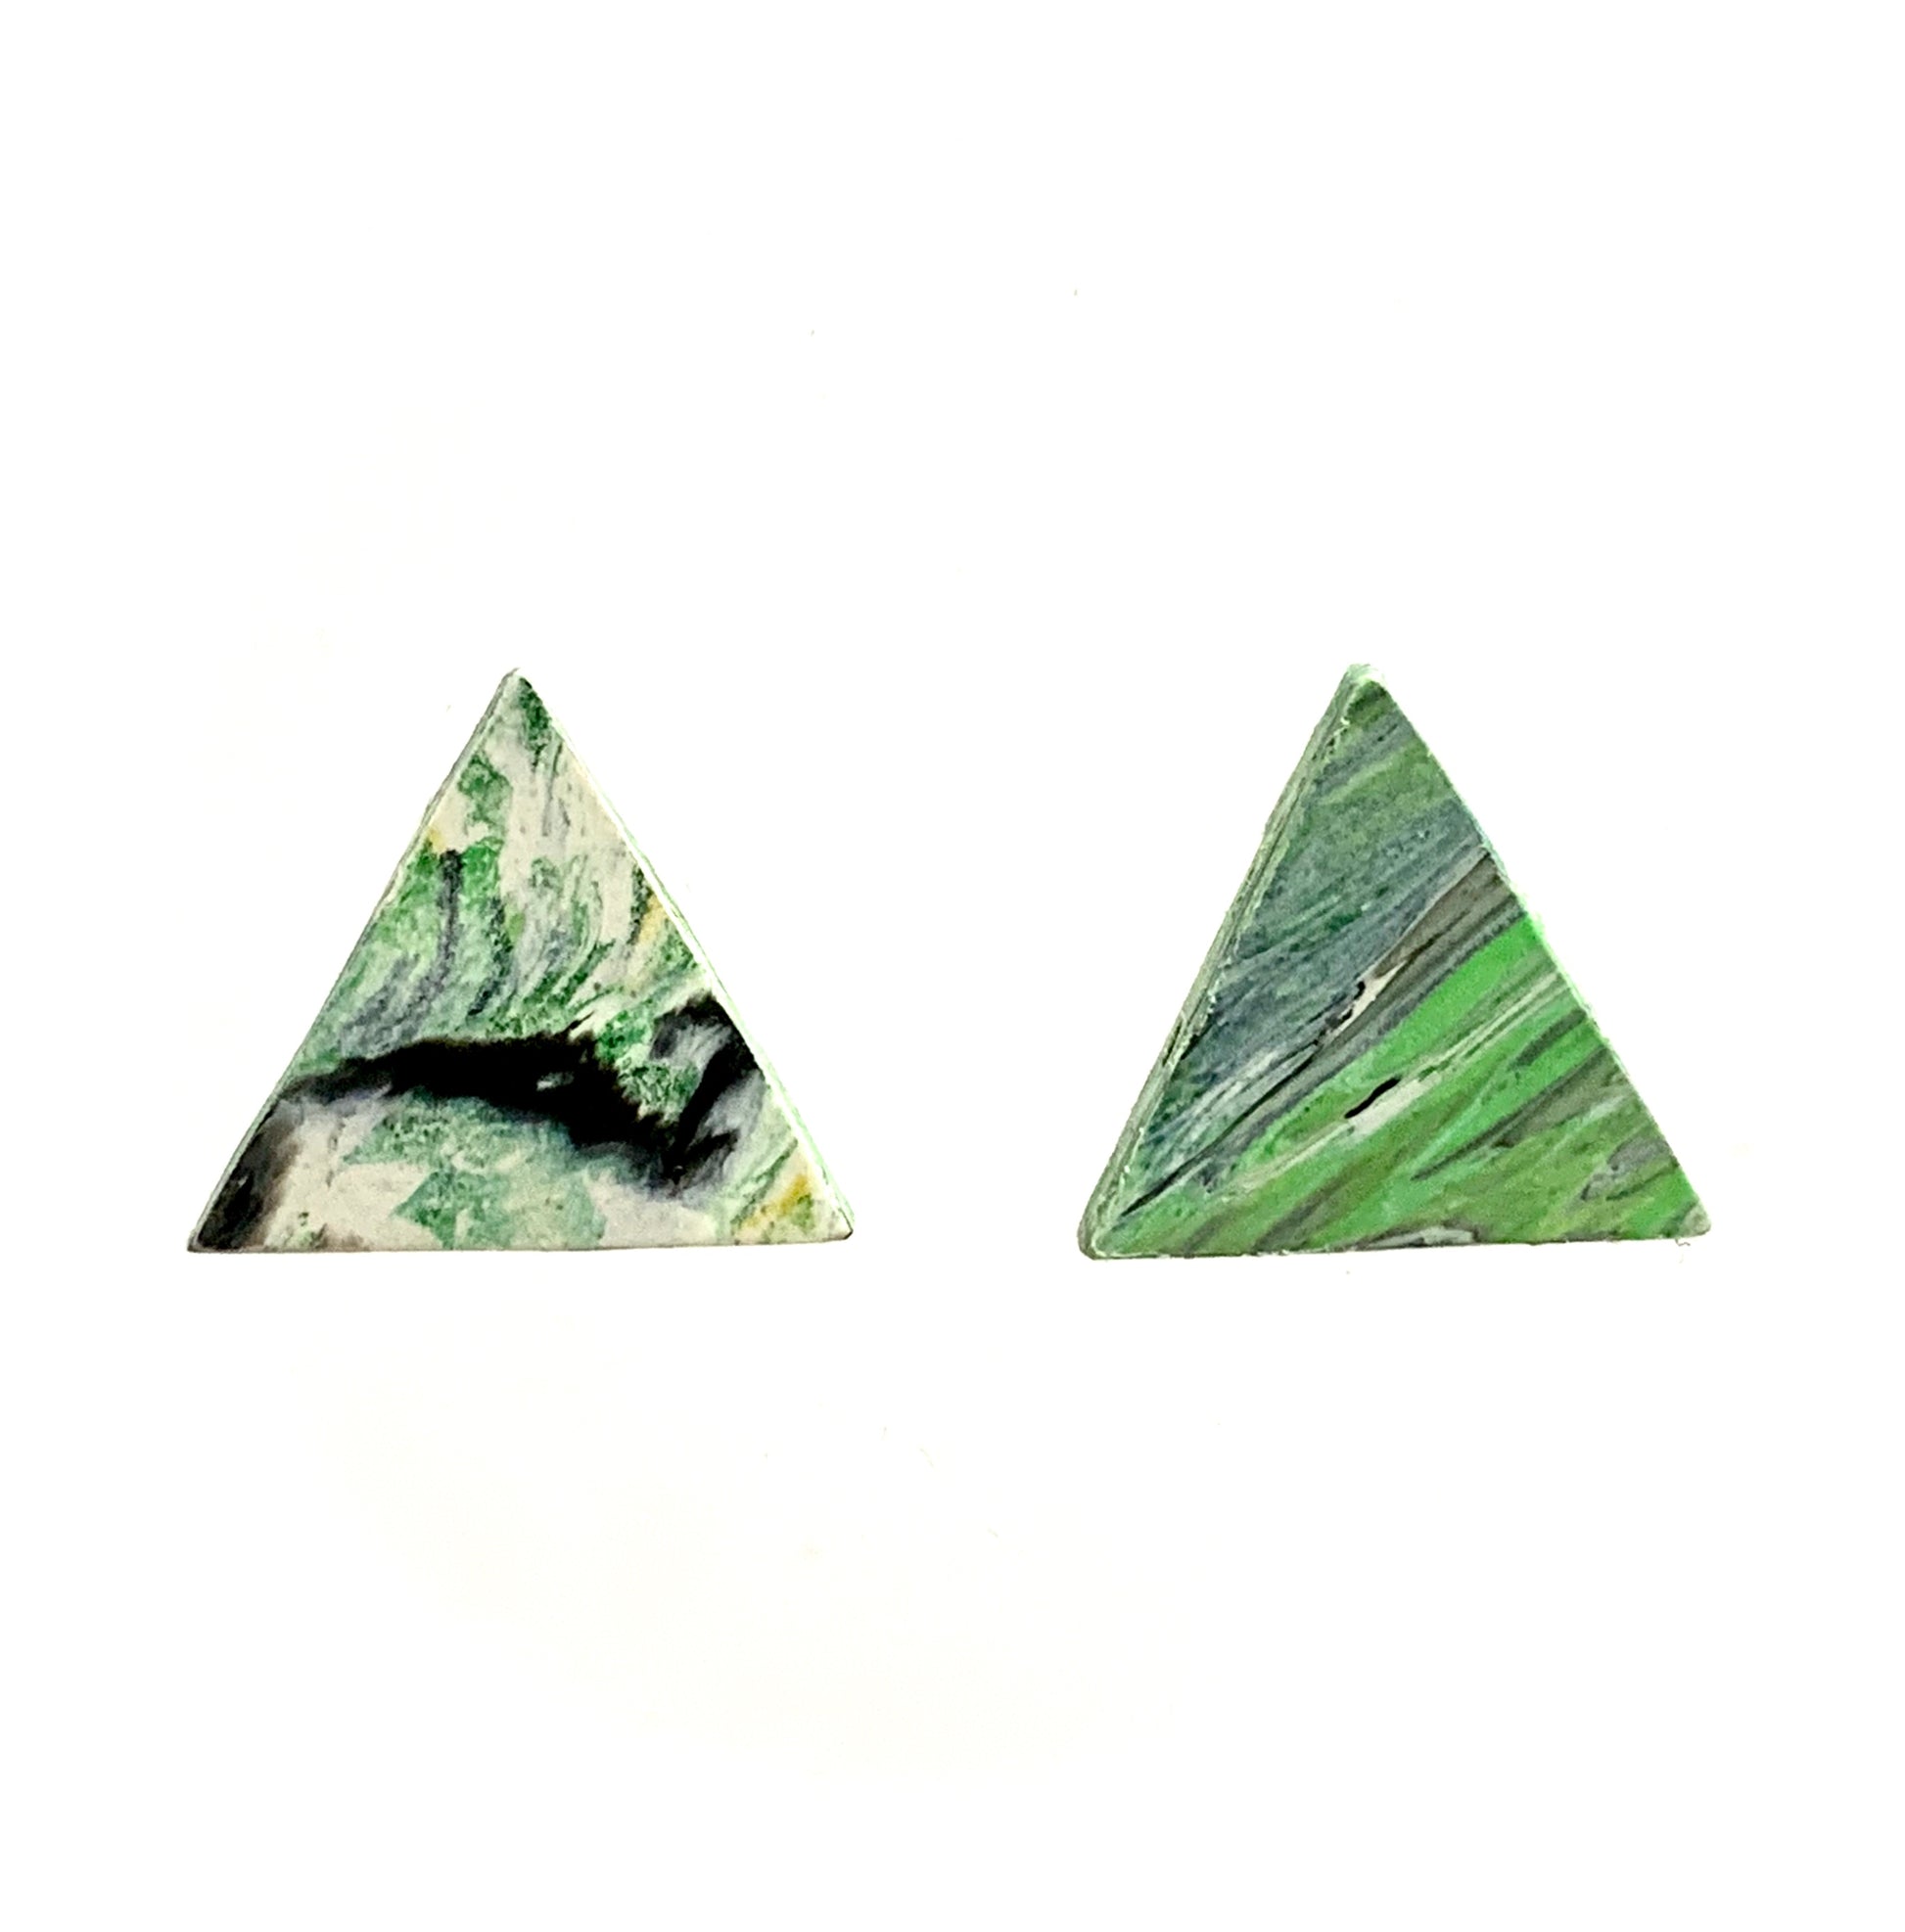 Sustainable triangle studs earrings handmade from recycled plastic